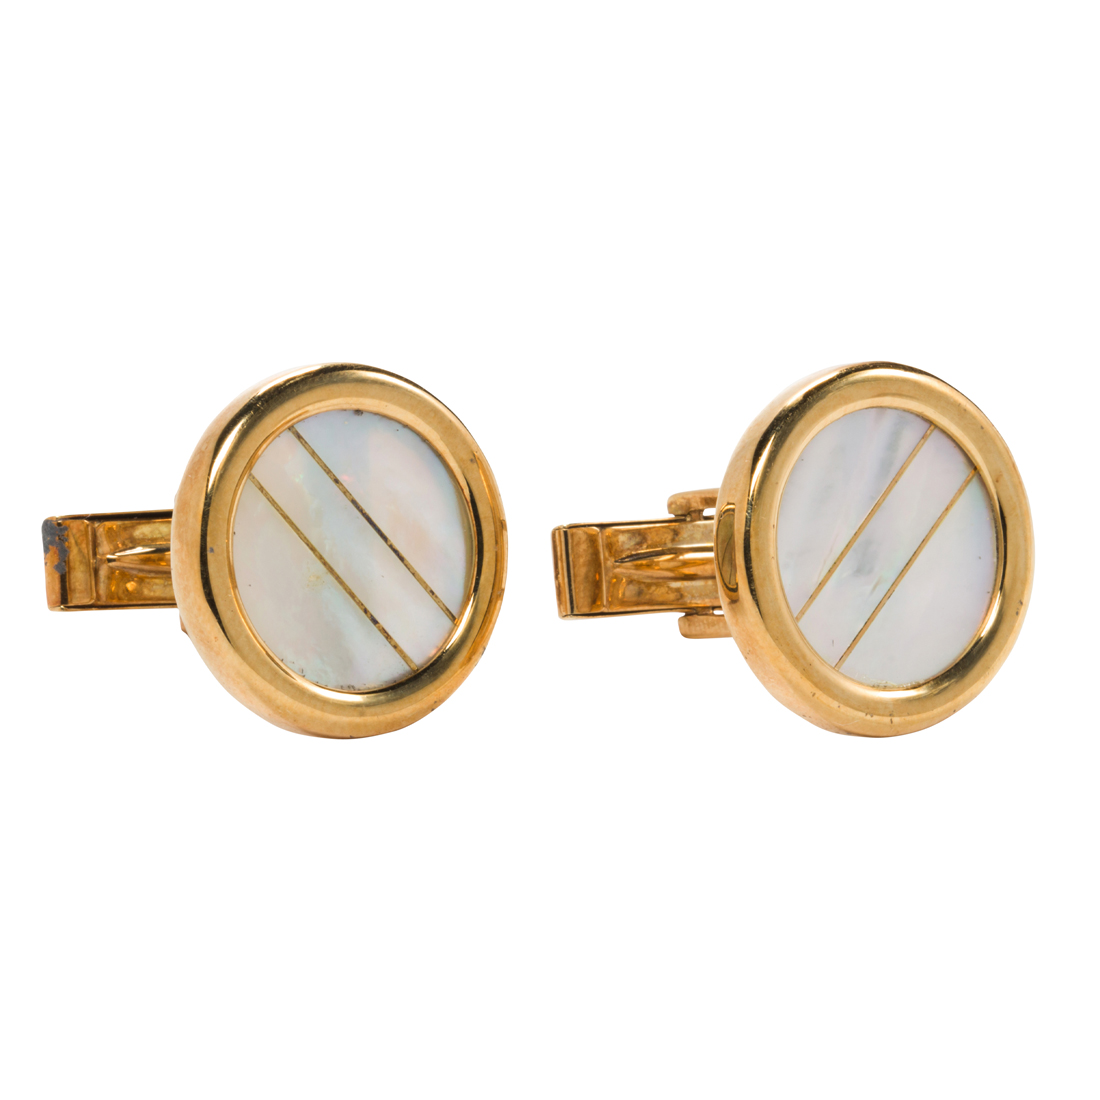 A PAIR OF MOTHER OF PEARL AND 14K 3ce26a